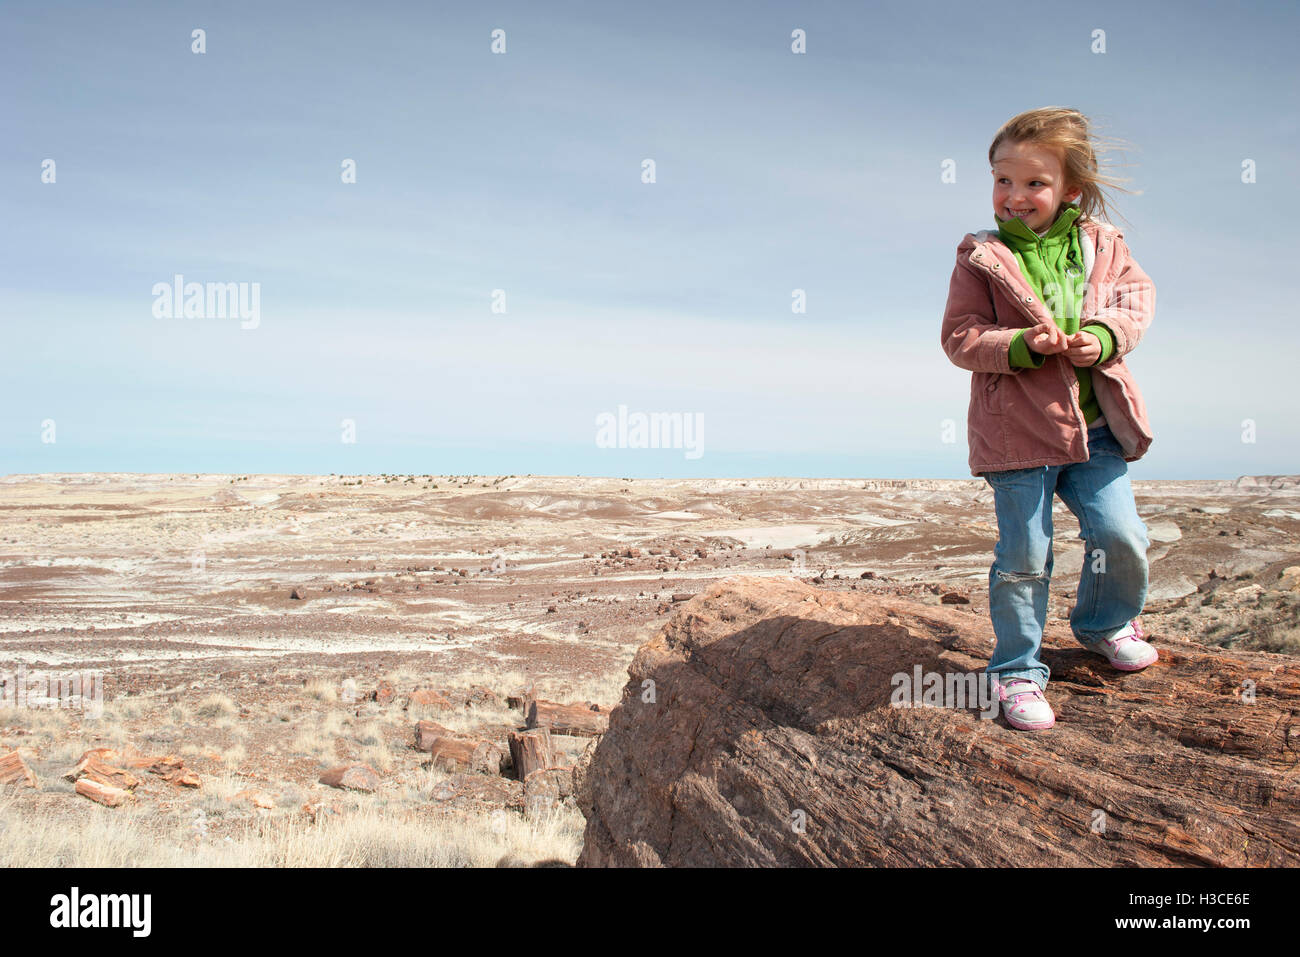 Girl visiting Petrified National Forest in Arizona, USA Stock Photo